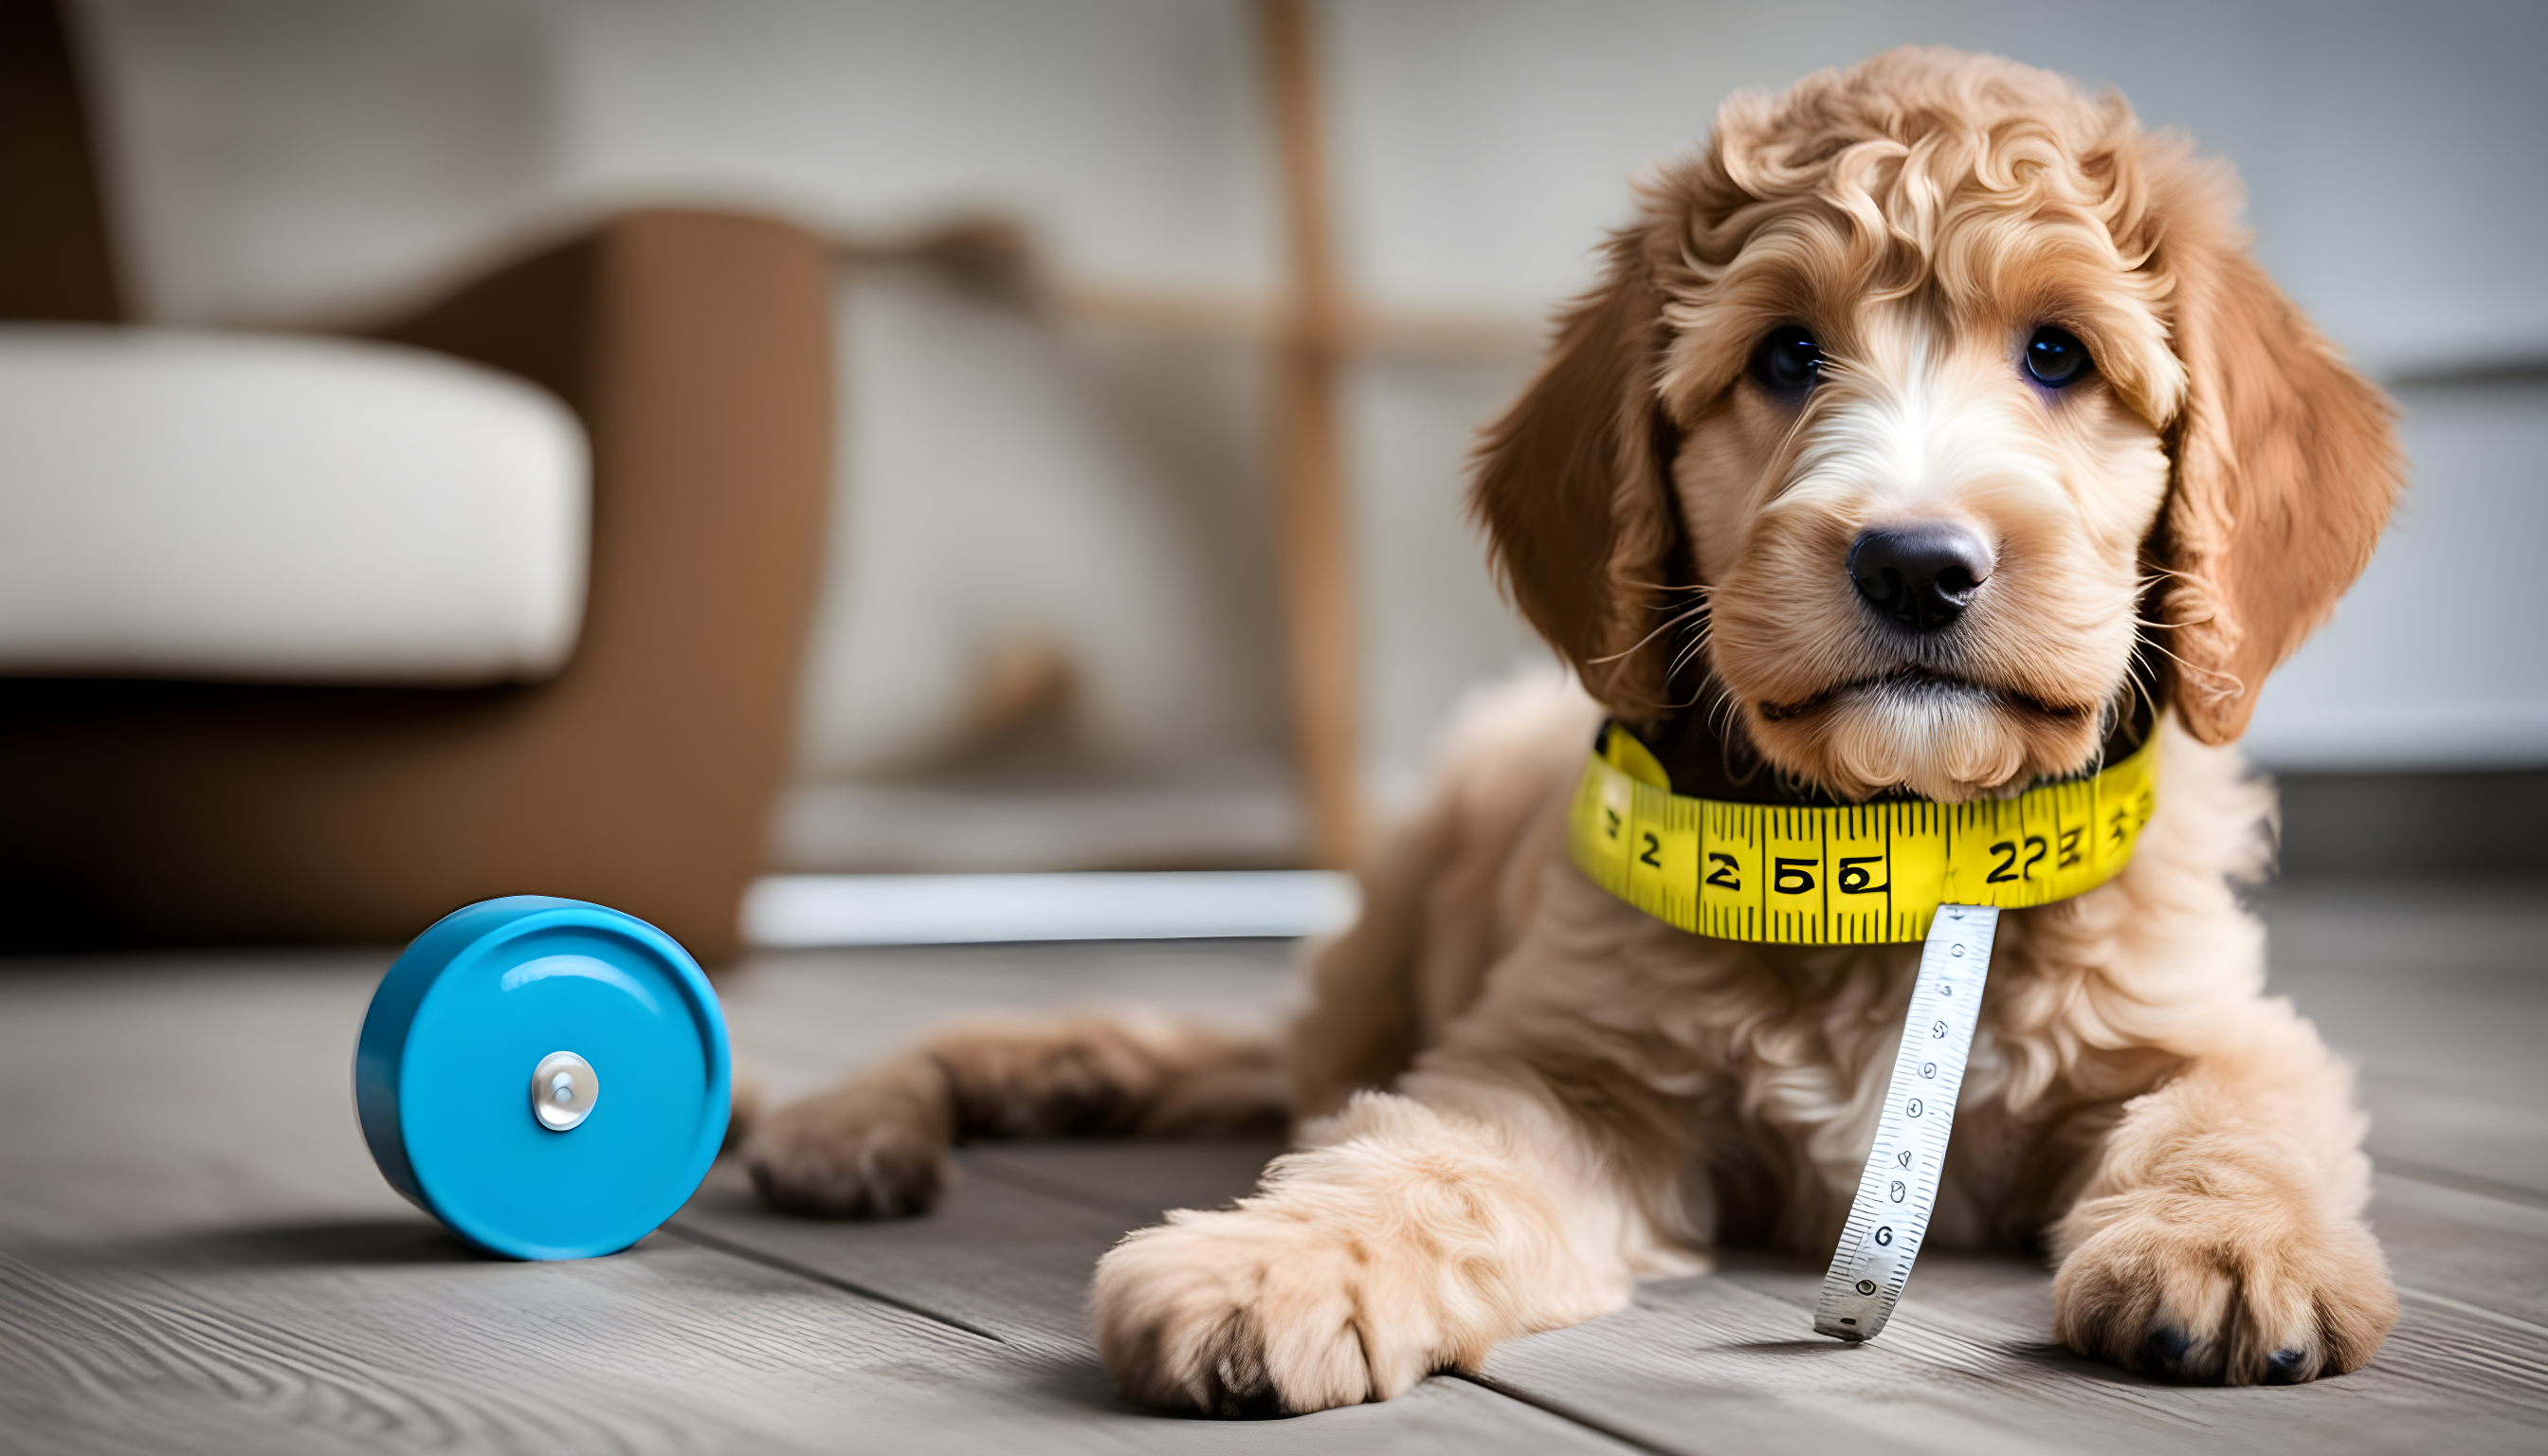 Labradoodle (Poodle Lab Mix) puppy looking puzzled next to a tape measure.